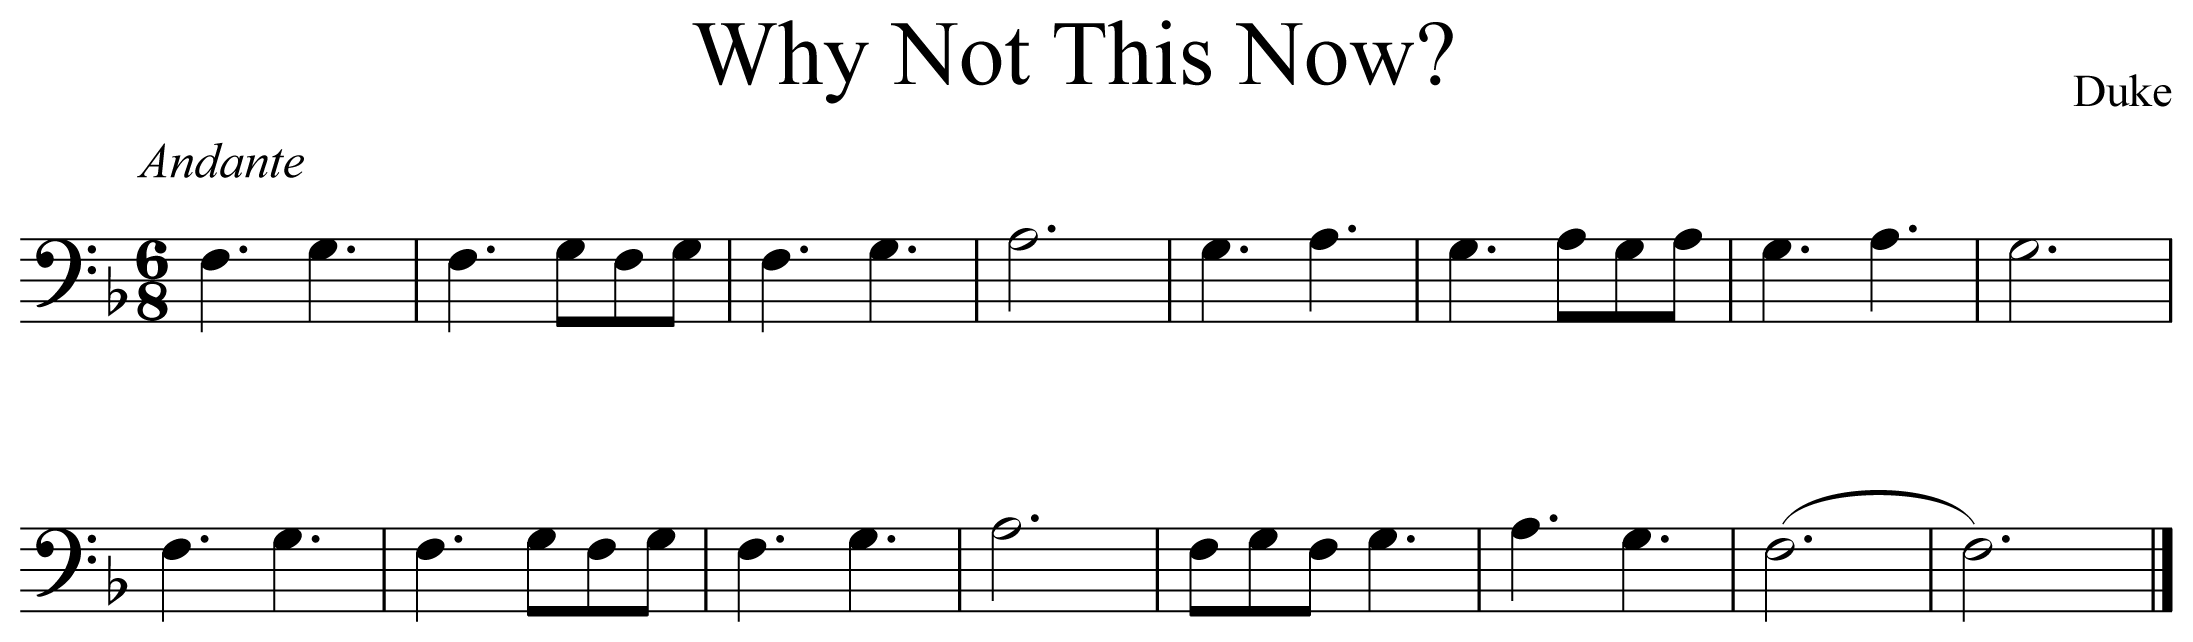 Why Not This Now Music Notation Euphonium